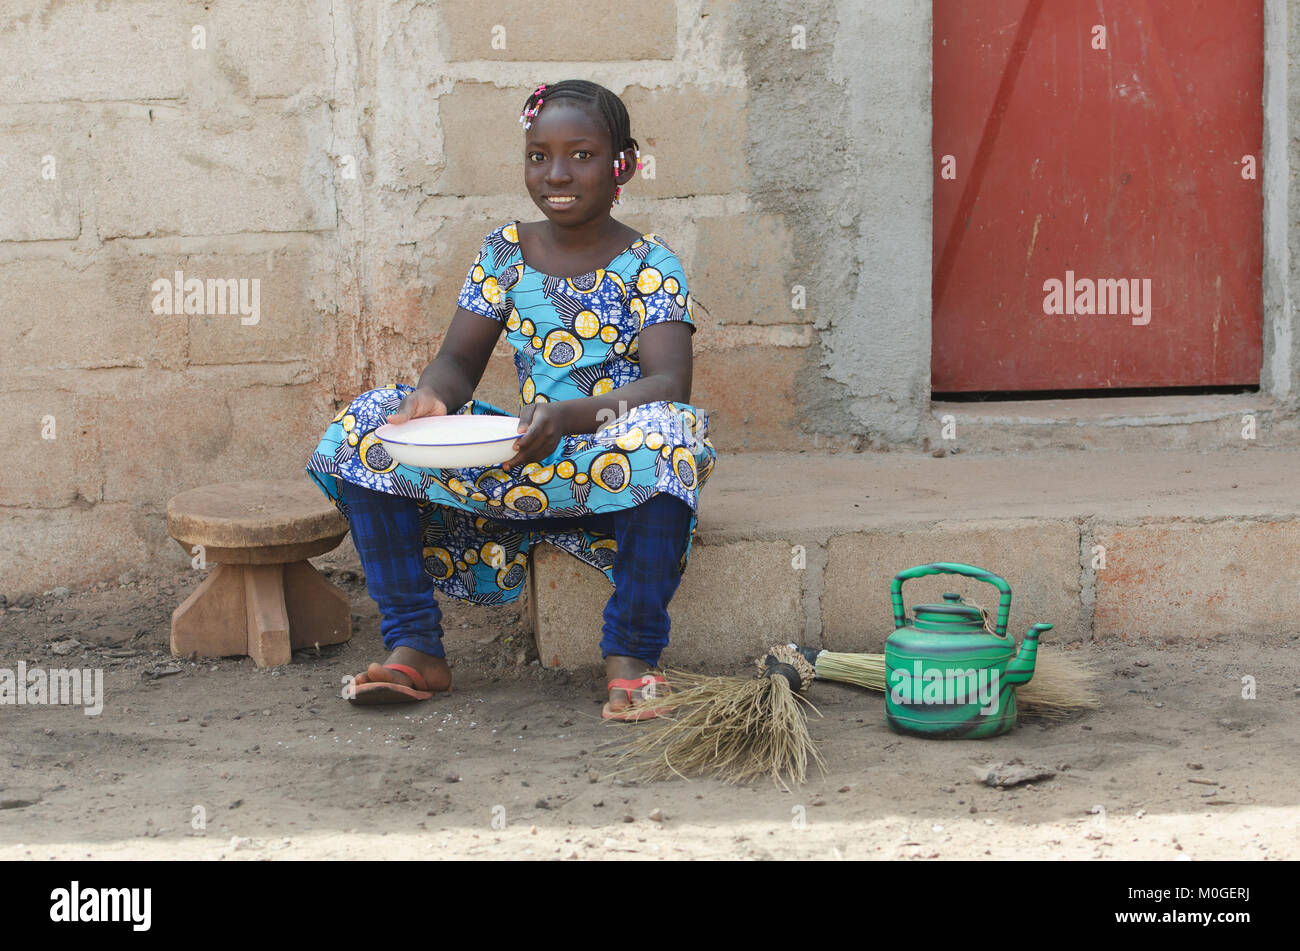 Little African Girl Cooking Rice Outdoors Smiling at Camera Stock Photo